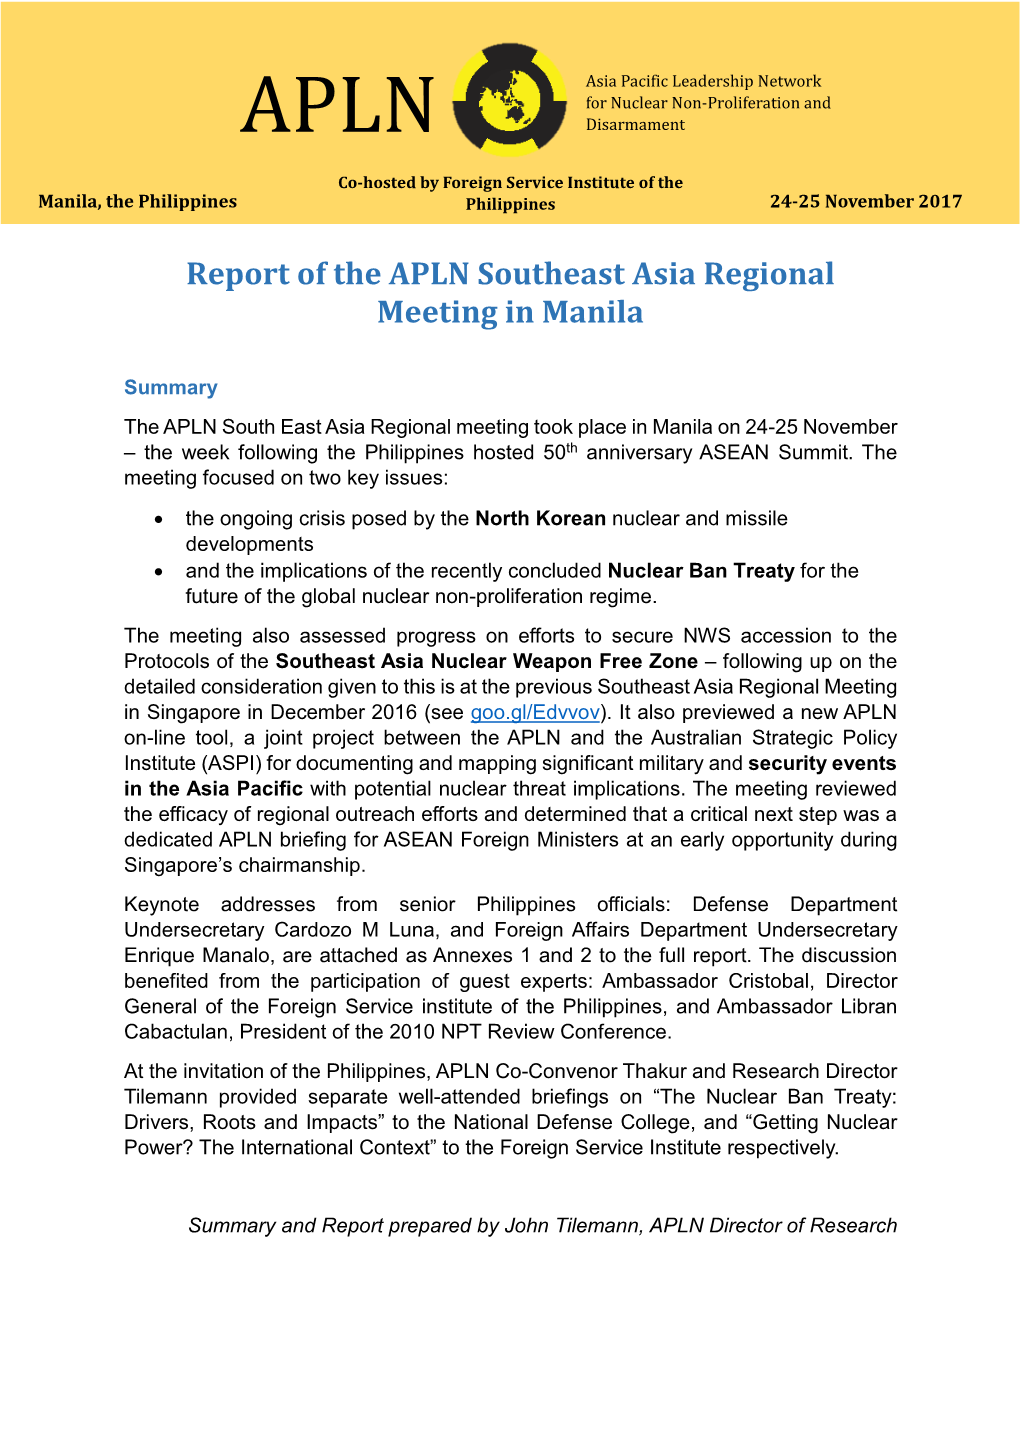 Report of the APLN Southeast Asia Regional Meeting in Manila